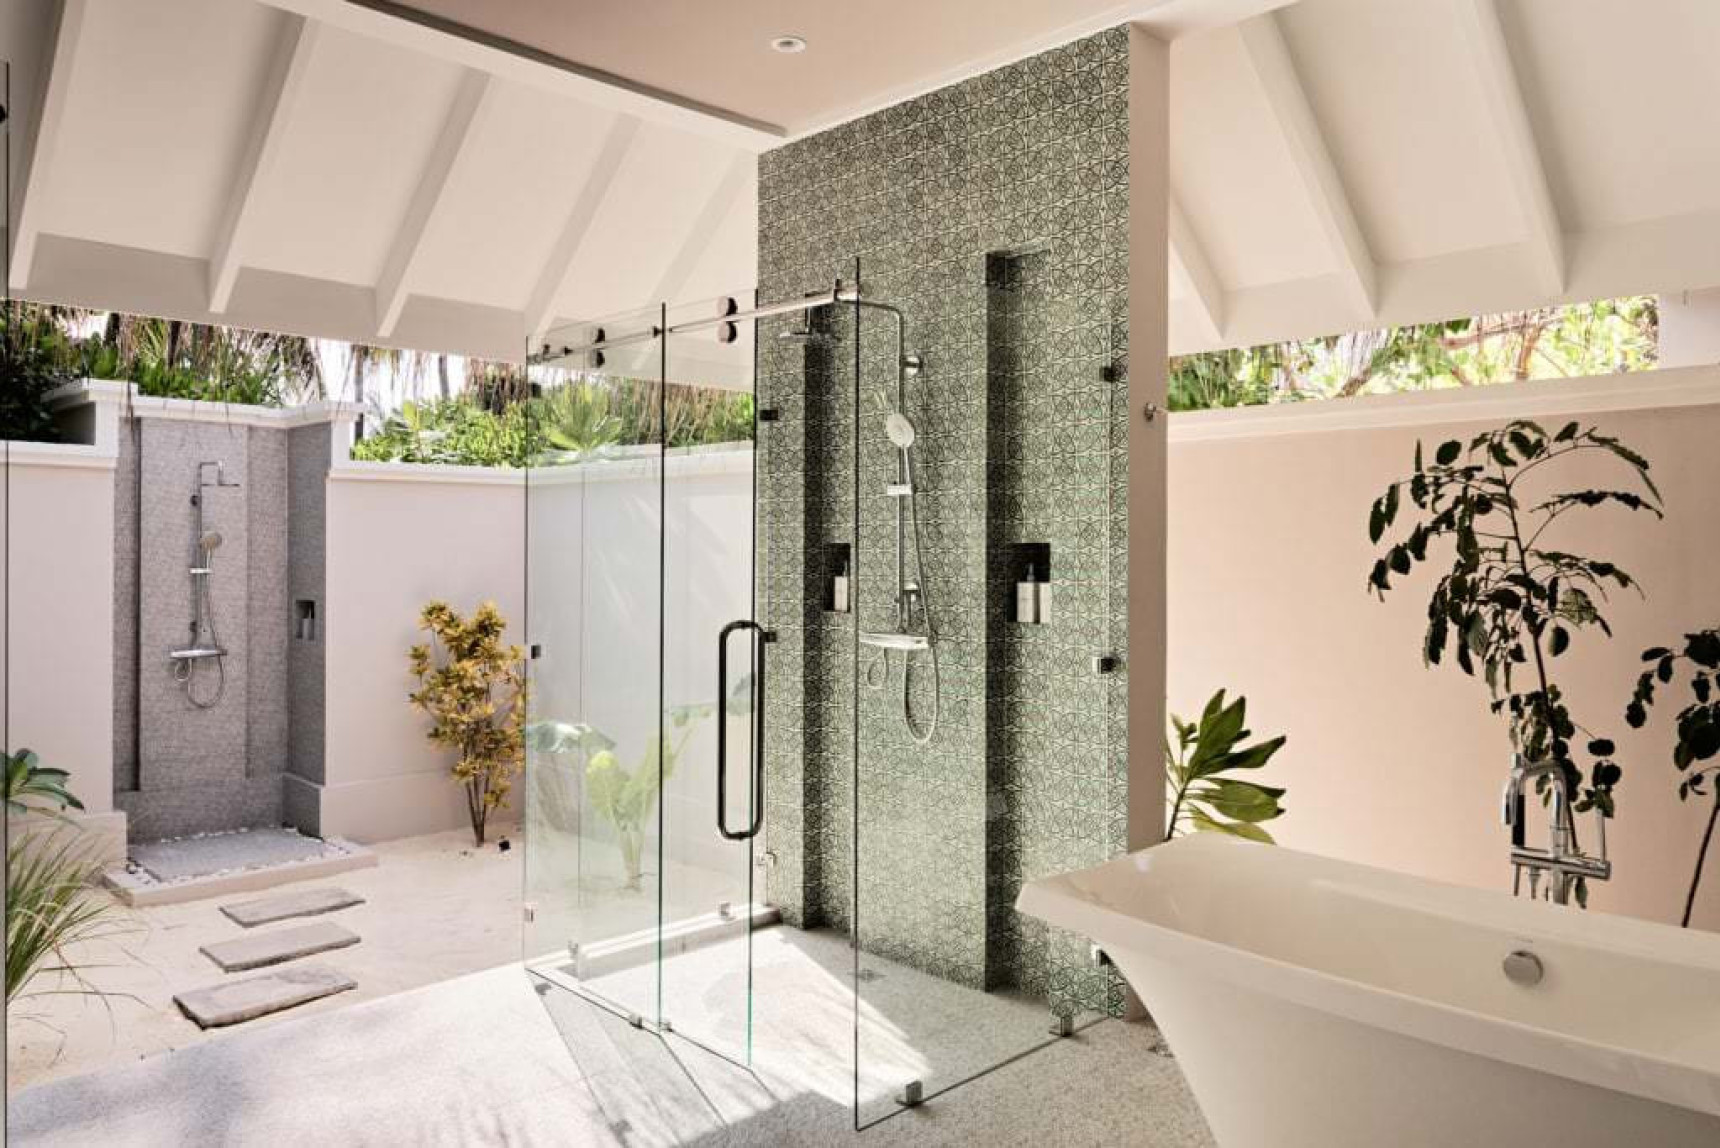 The Maldives edition – an intimate Q&A with Finolhu’s GM Marc reader bathroom shower